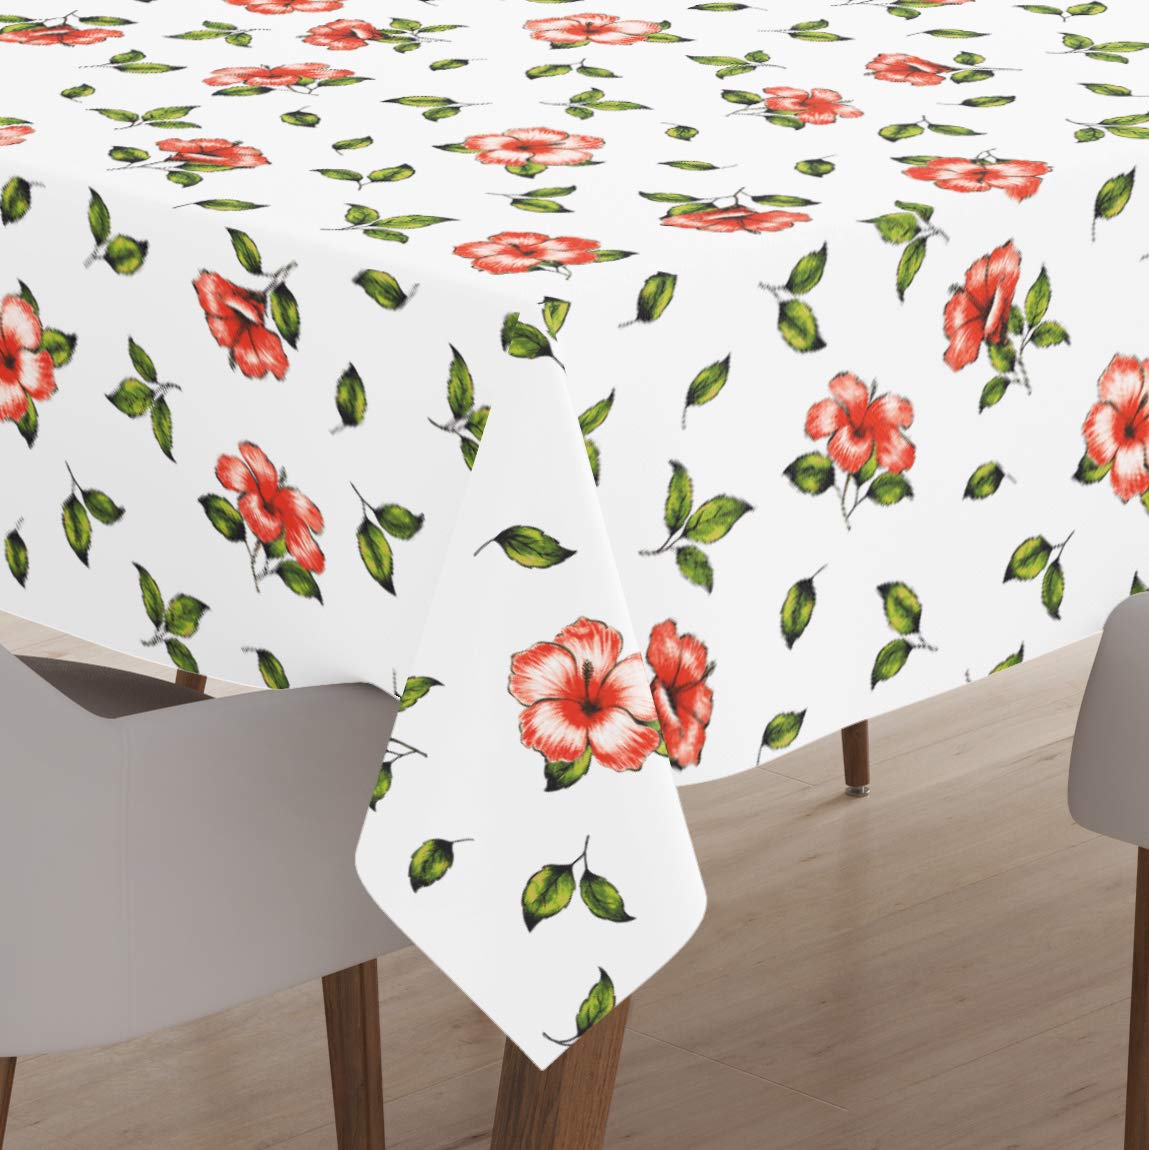 Encasa Homes Printed Rectangular Table Cloth 7.5 Ft For 6 To 8 Seater Dining Table, 100% Silky Polyester, Machine Wash To Remove Food Stains, Non-Fading, Non-Shrinking - Hibiscus